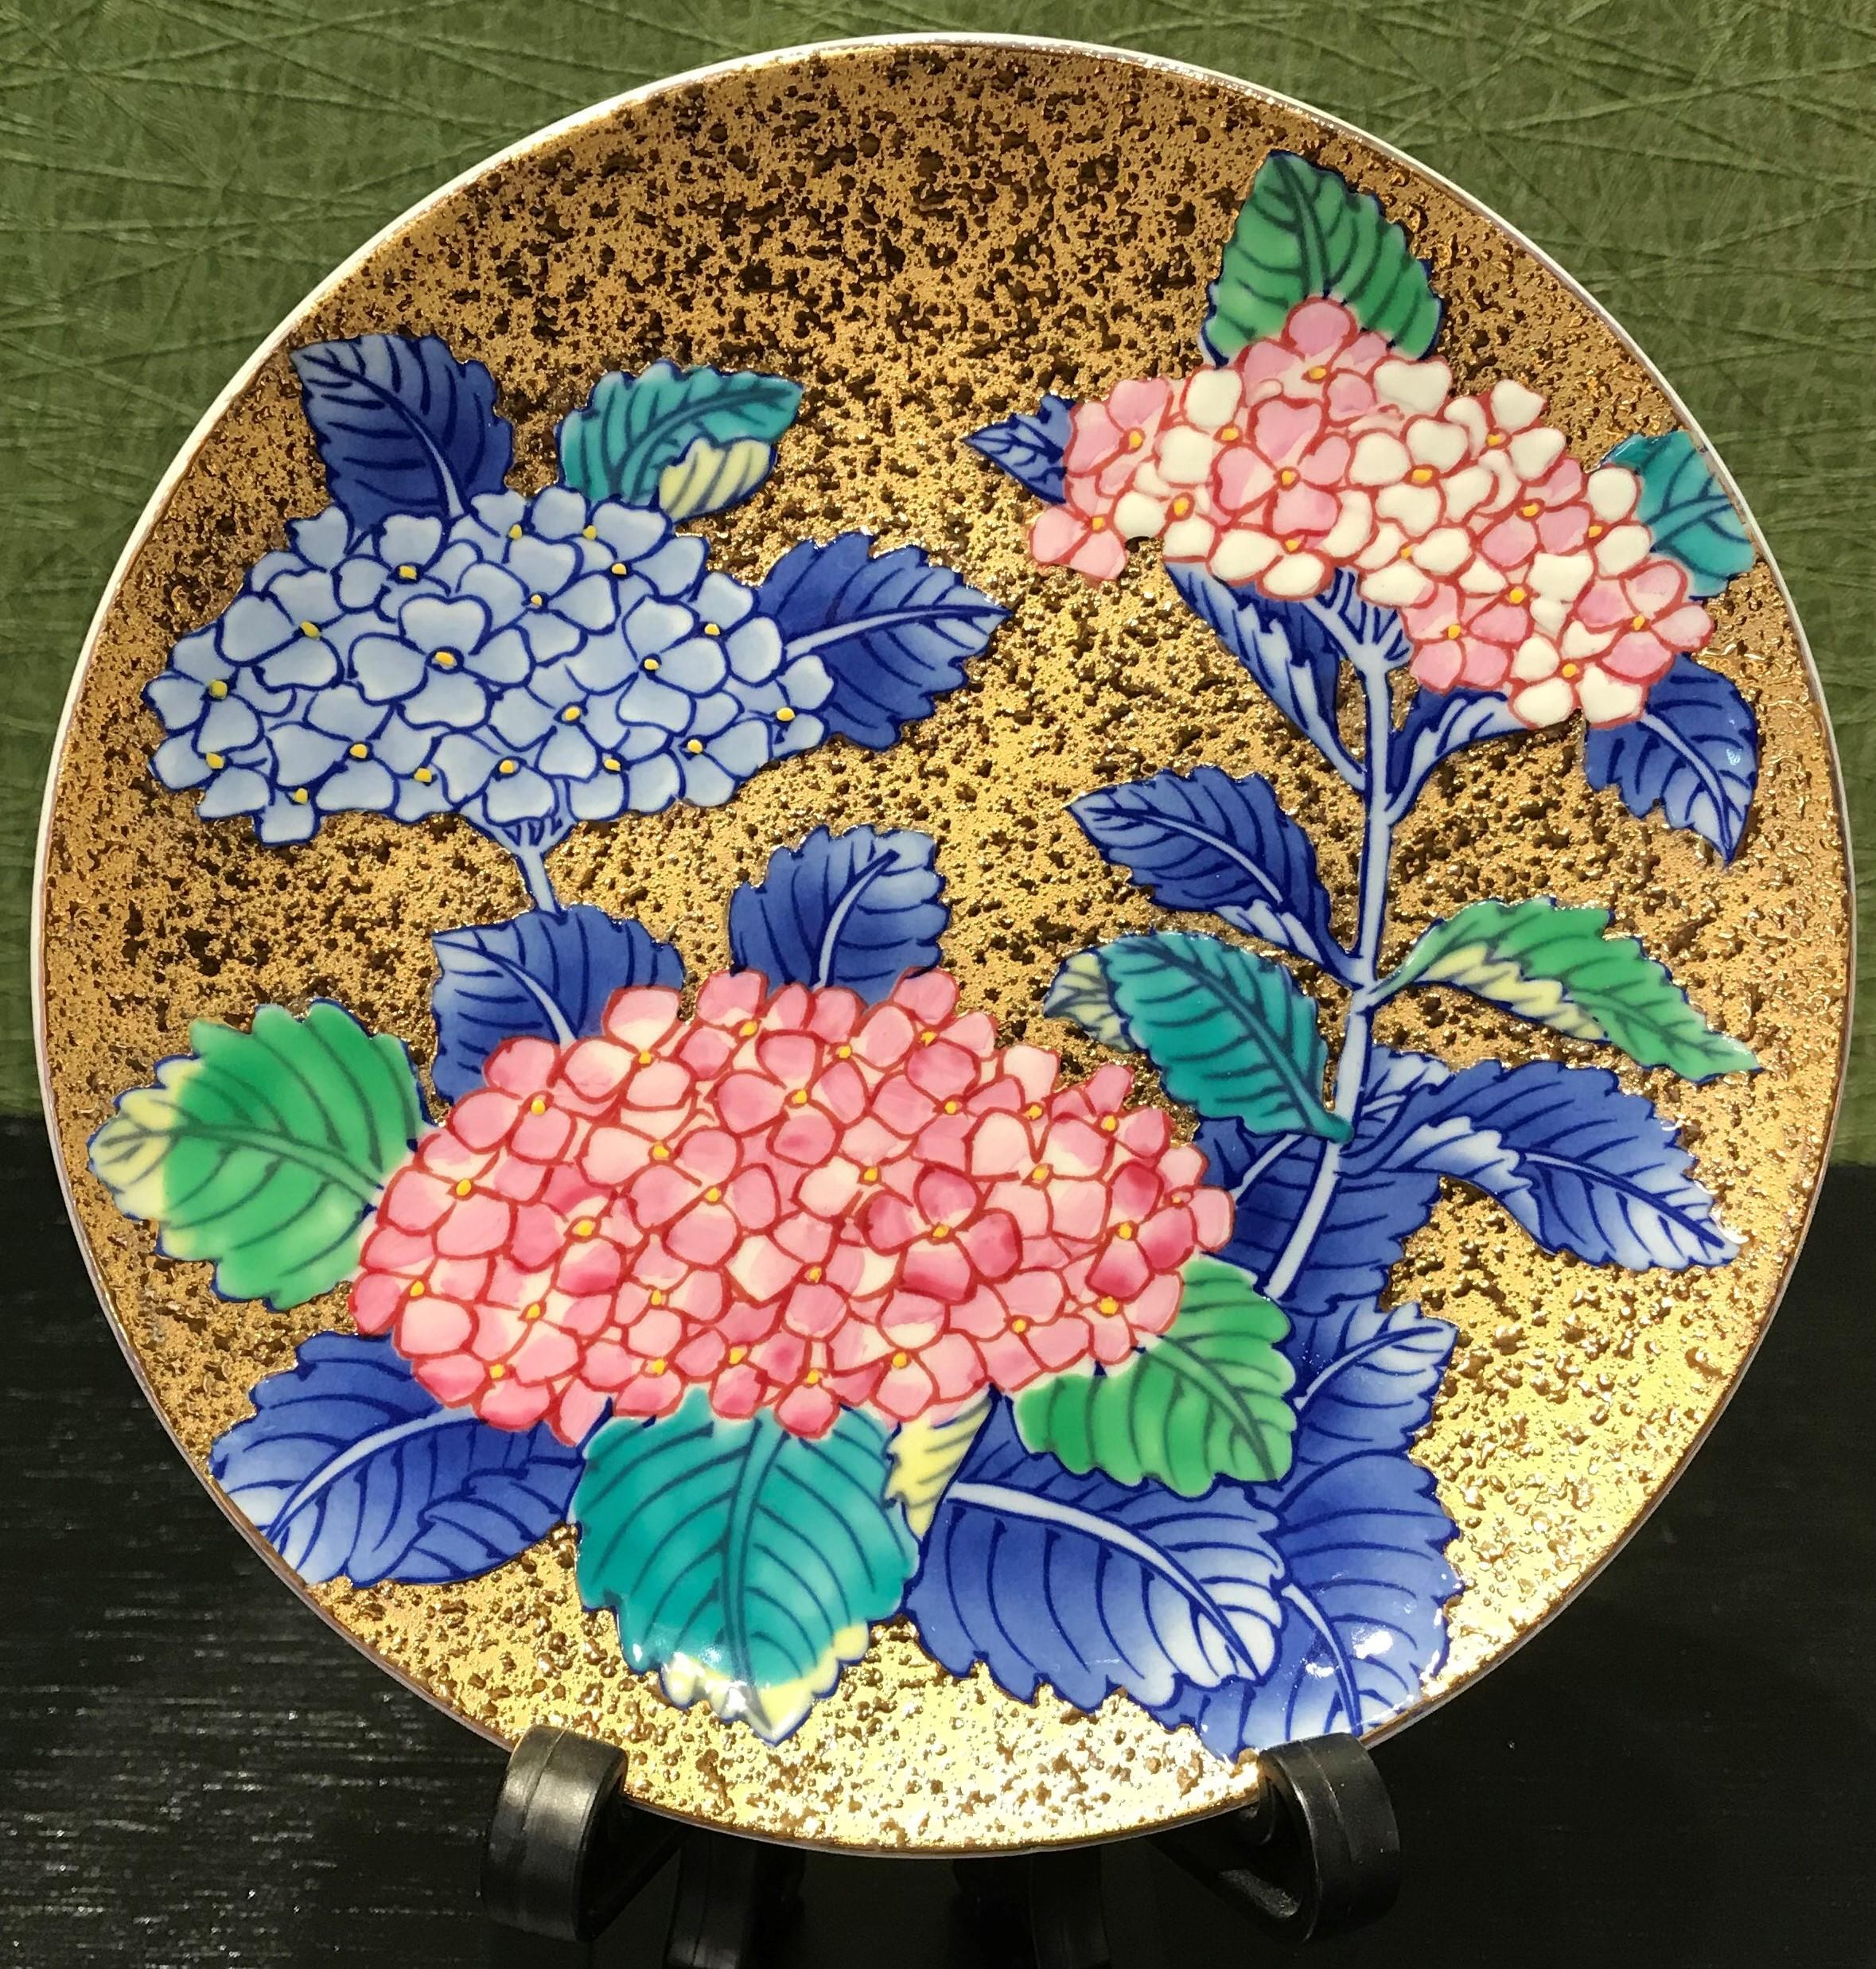 Exceptional contemporary gilded porcelain cup and saucer, intricately hand painted in vivid blue and pink on an attractive gilded body, featuring stunning hydrangeas in full bloom.
This cup and saucer is a masterpiece from a signature series by a